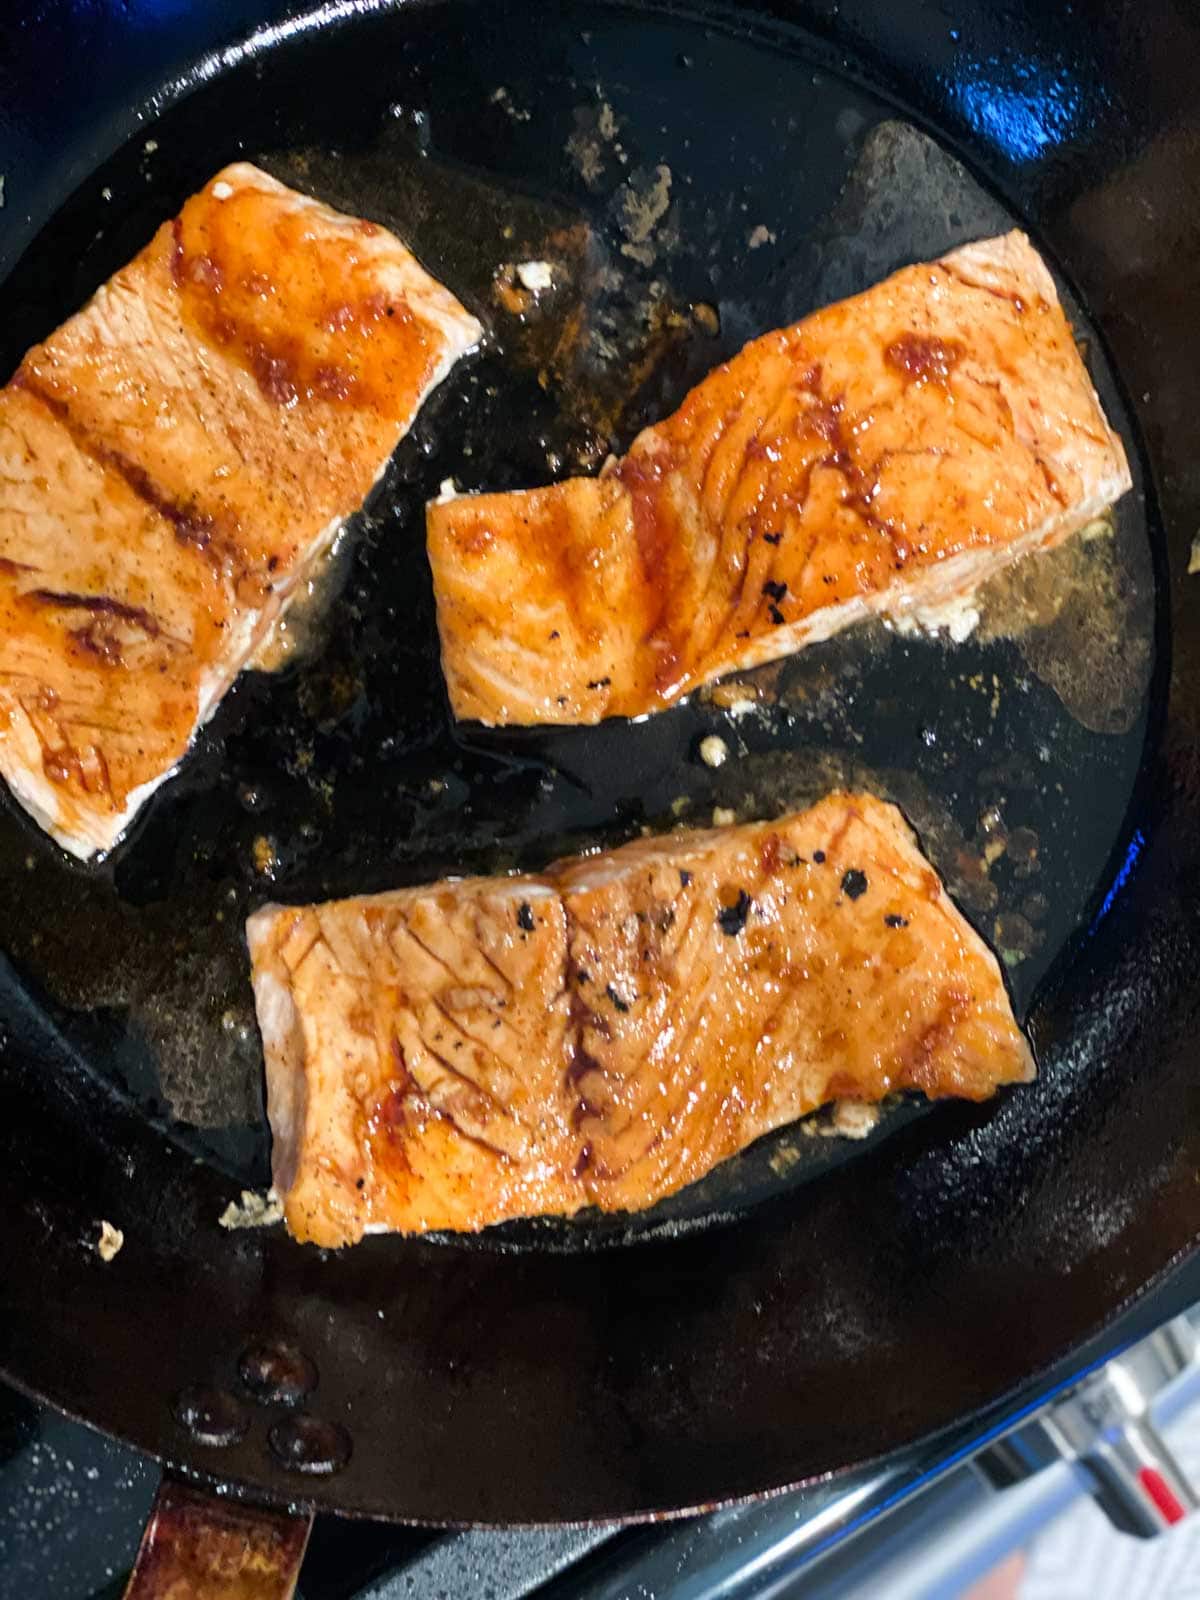 Three salmon filets being pan-fried and brushed with teriyaki sauce